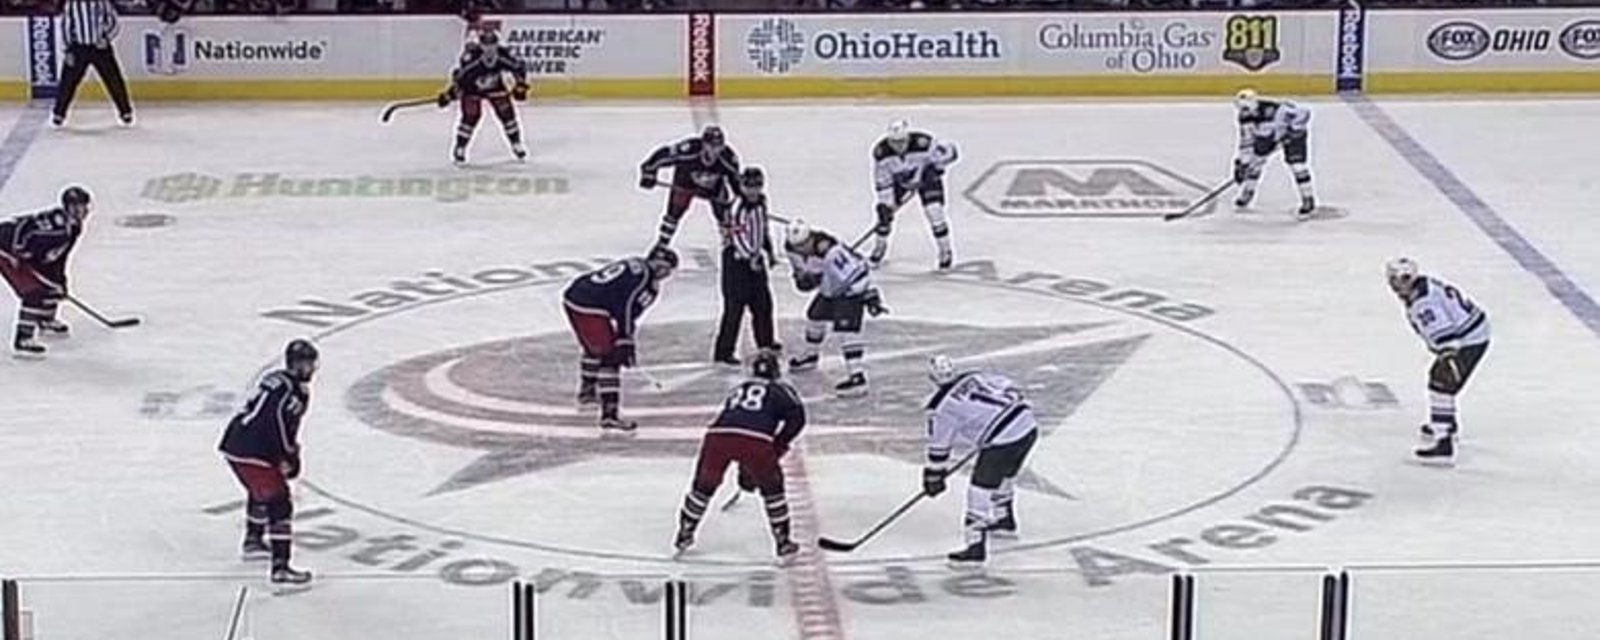 Granlund scores off the face off, in just two seconds, from center ice.